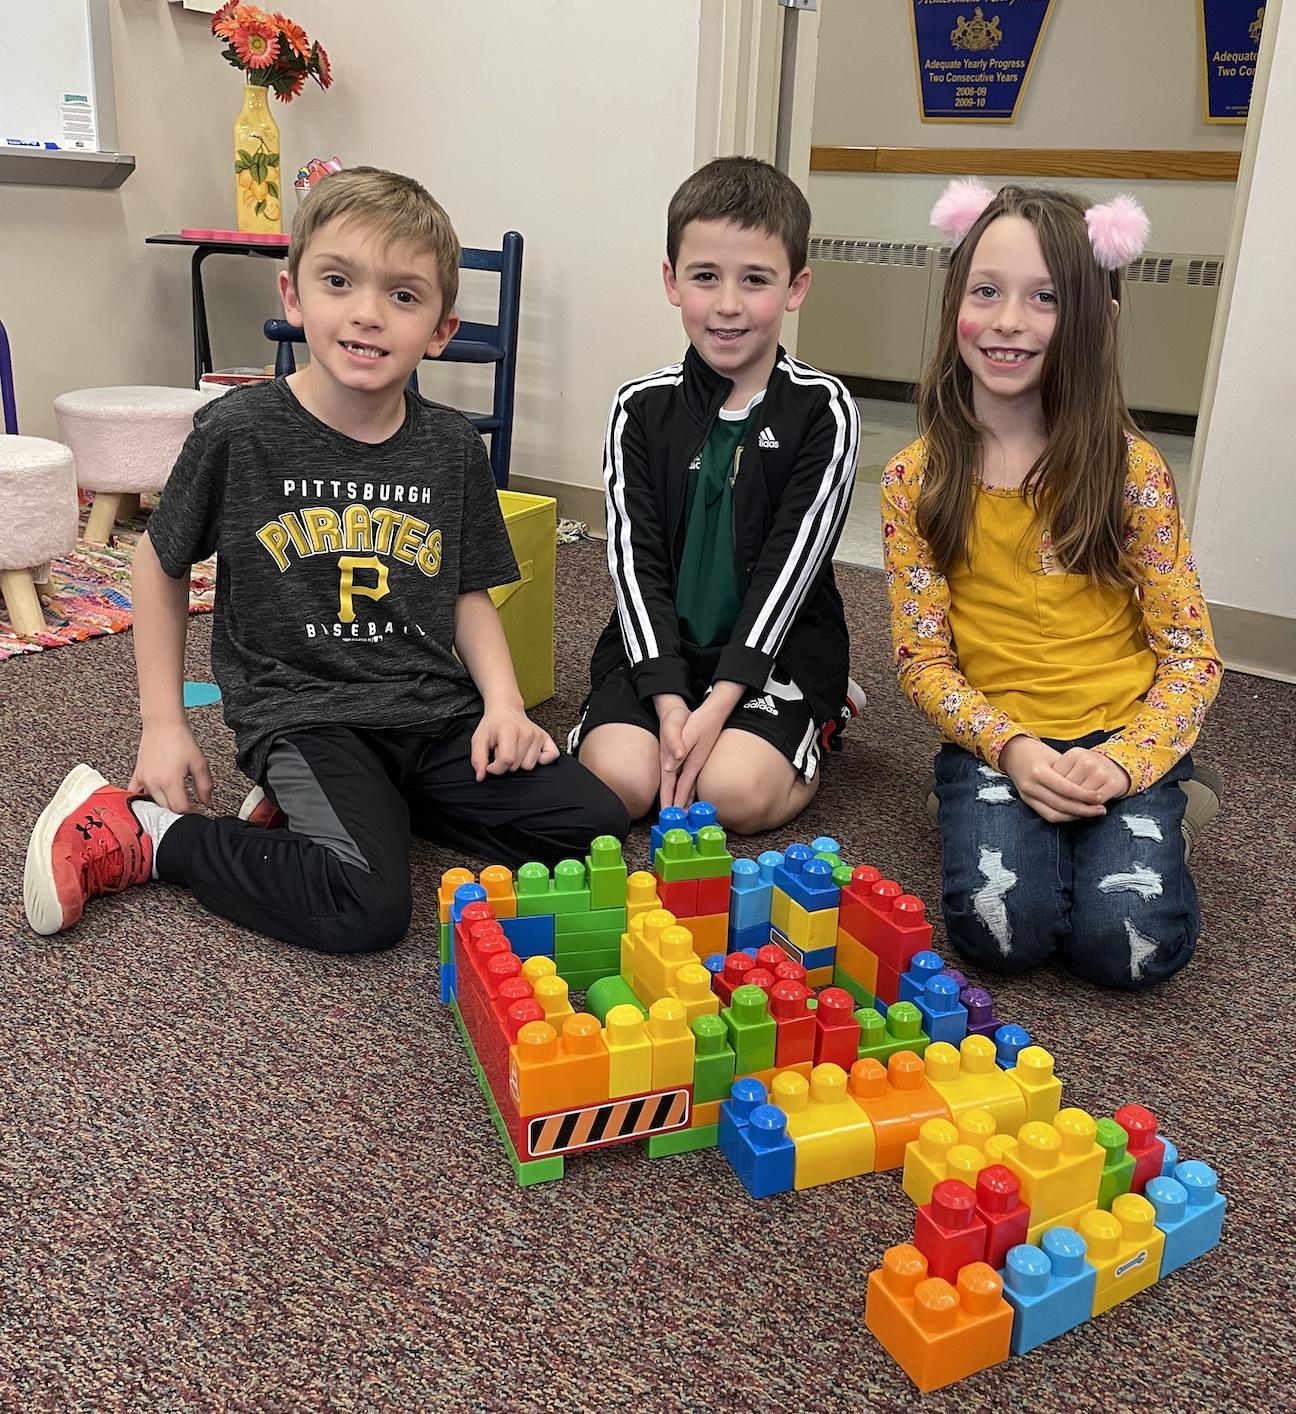 Anthony Cinti, Blake Savinda, and Lily King worked together to build this school using blocks